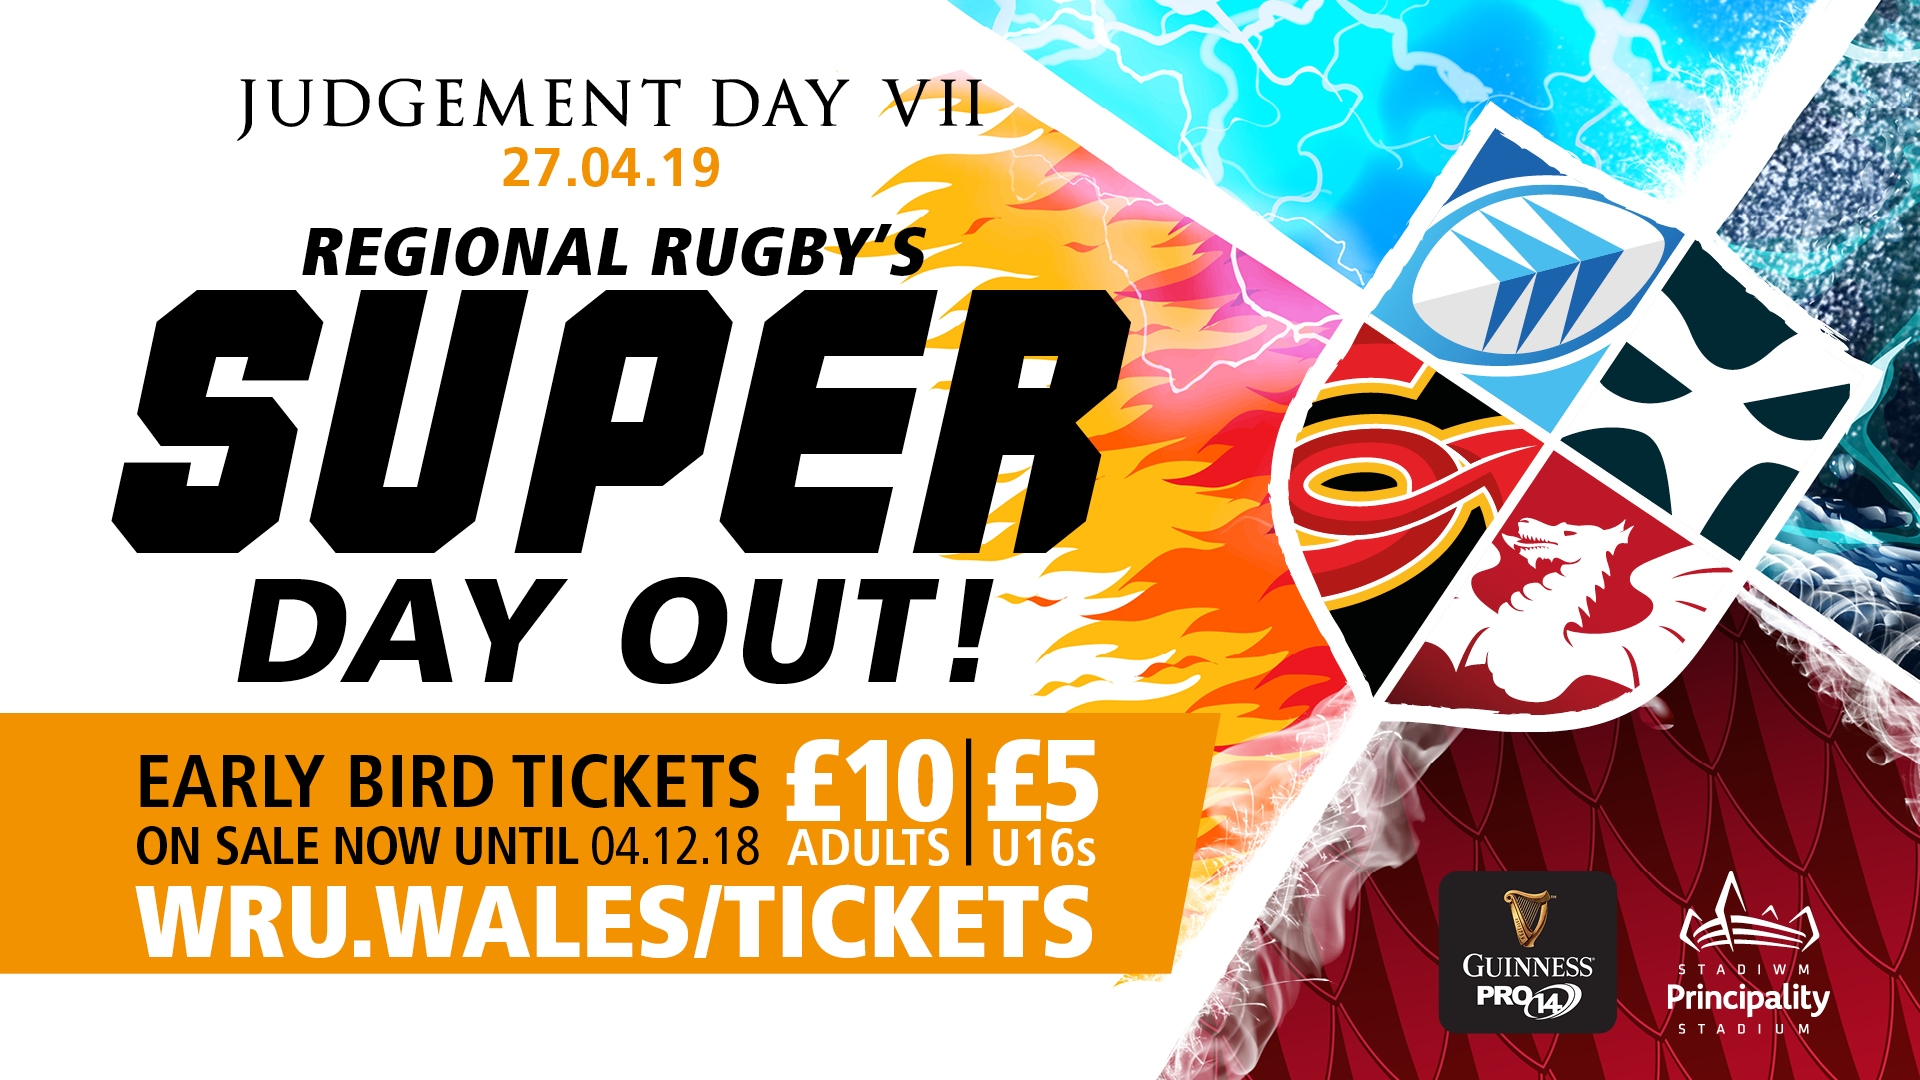 Judgement Day Vii Tickets On Sale Now As Super Day Out Will Run